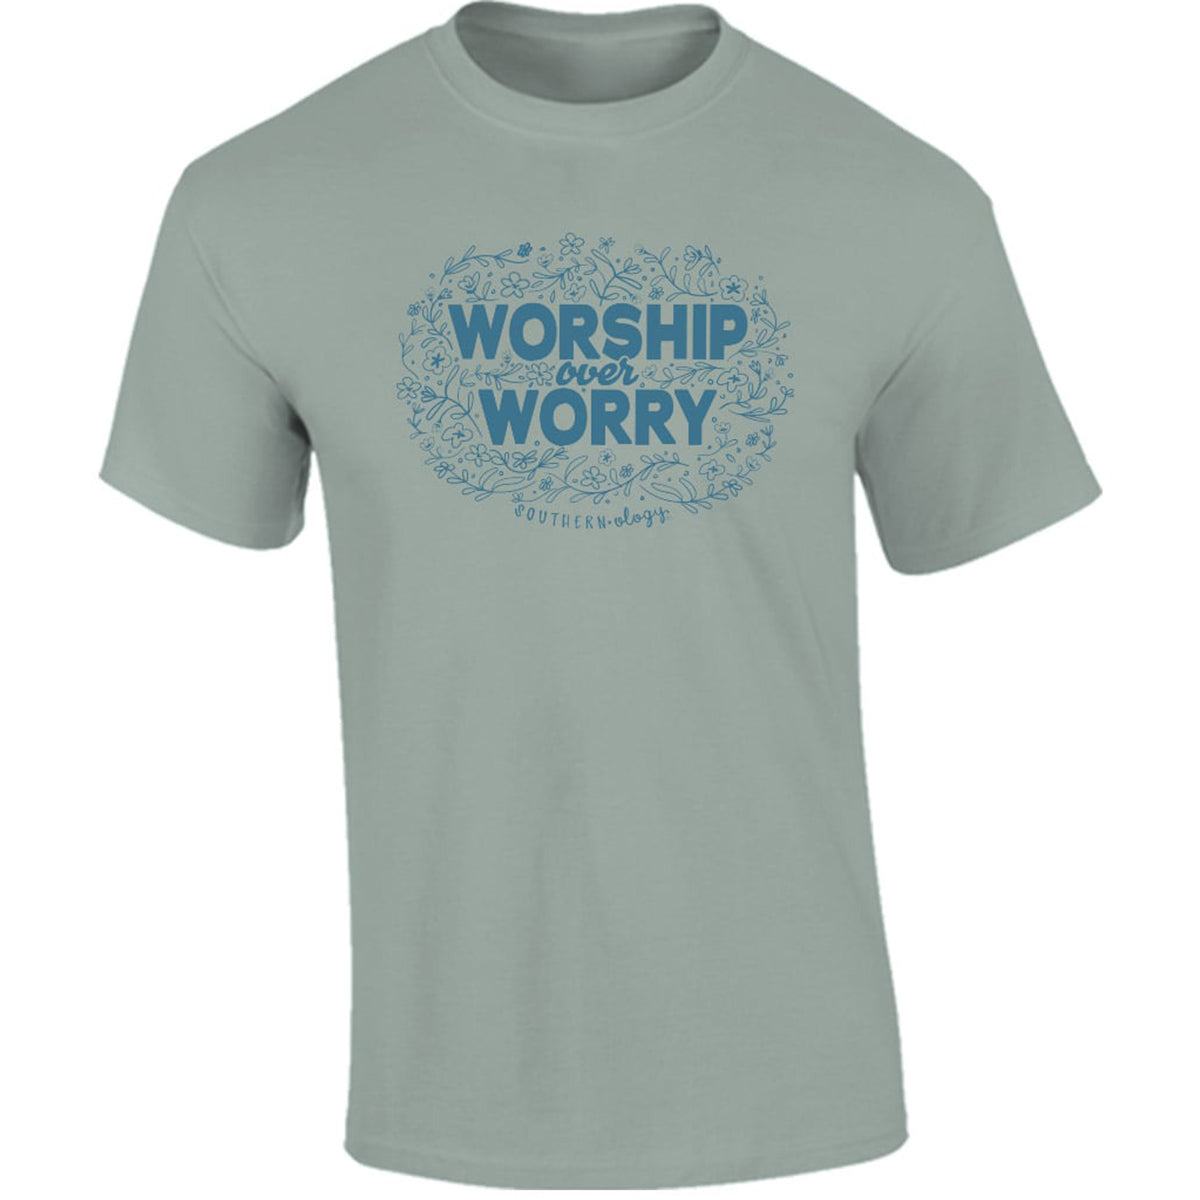 Southernology Worship Over Worry Comfort Colors T-Shirt